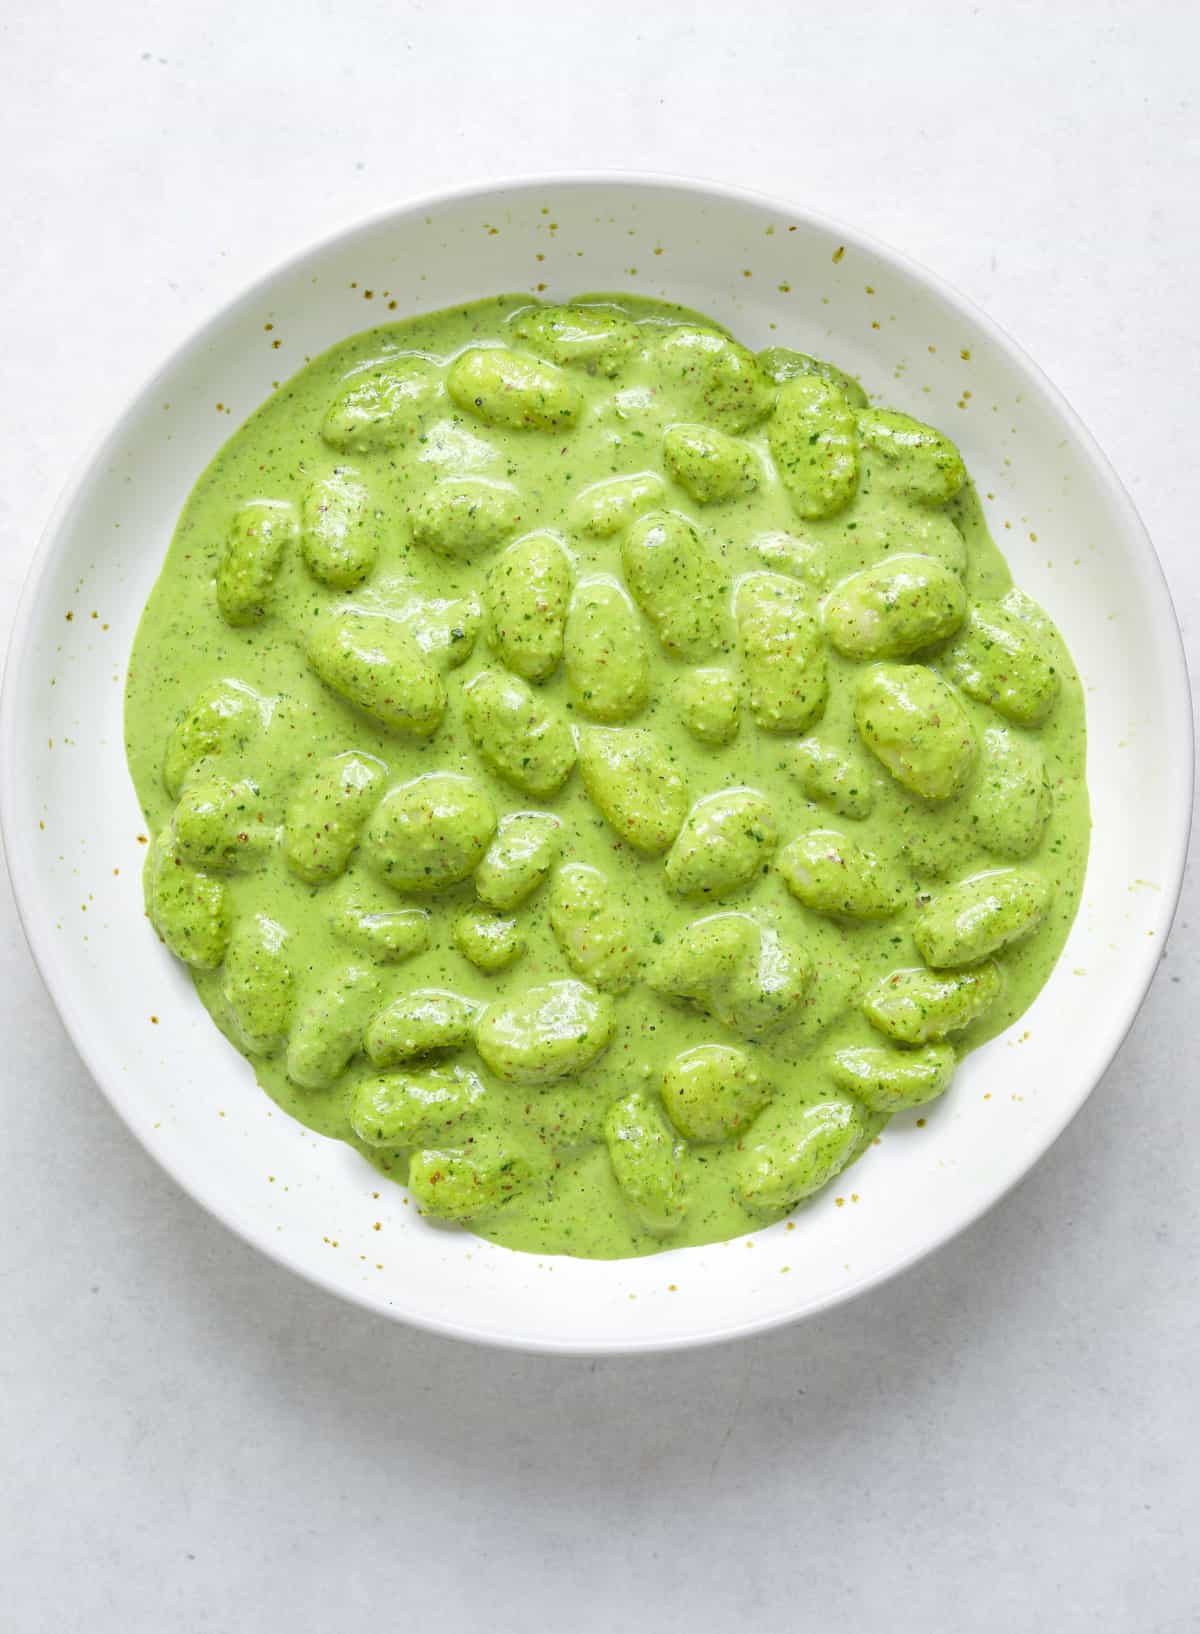 A white ceramic bowl of gnocchi with a green pasta sauce on a blue background.